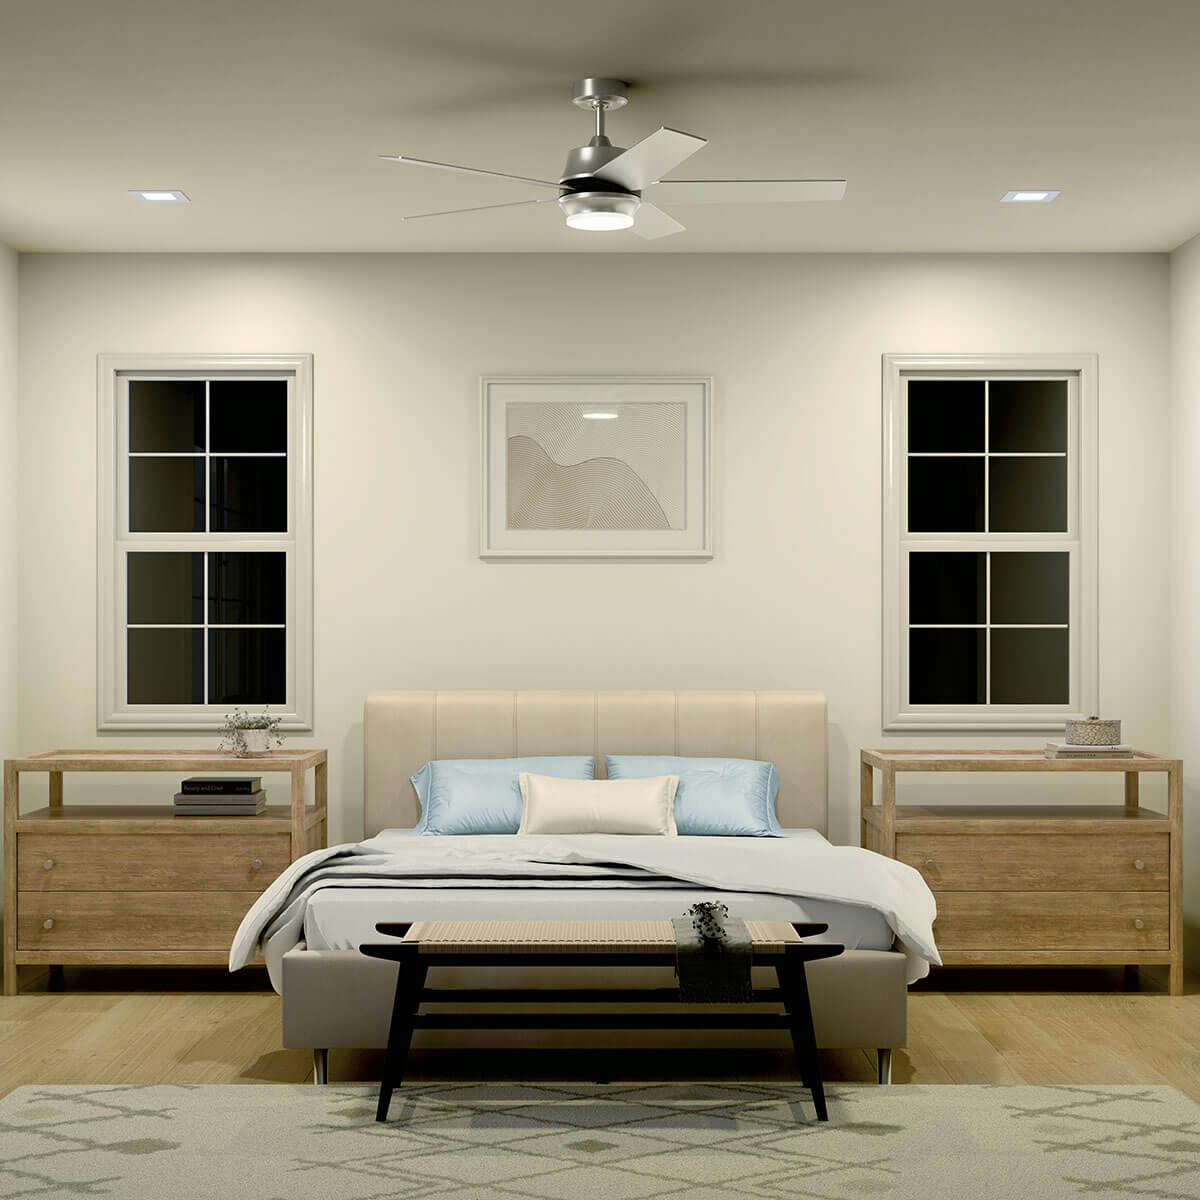 Night time bedroom image featuring Brahm ceiling fan 300059BSS